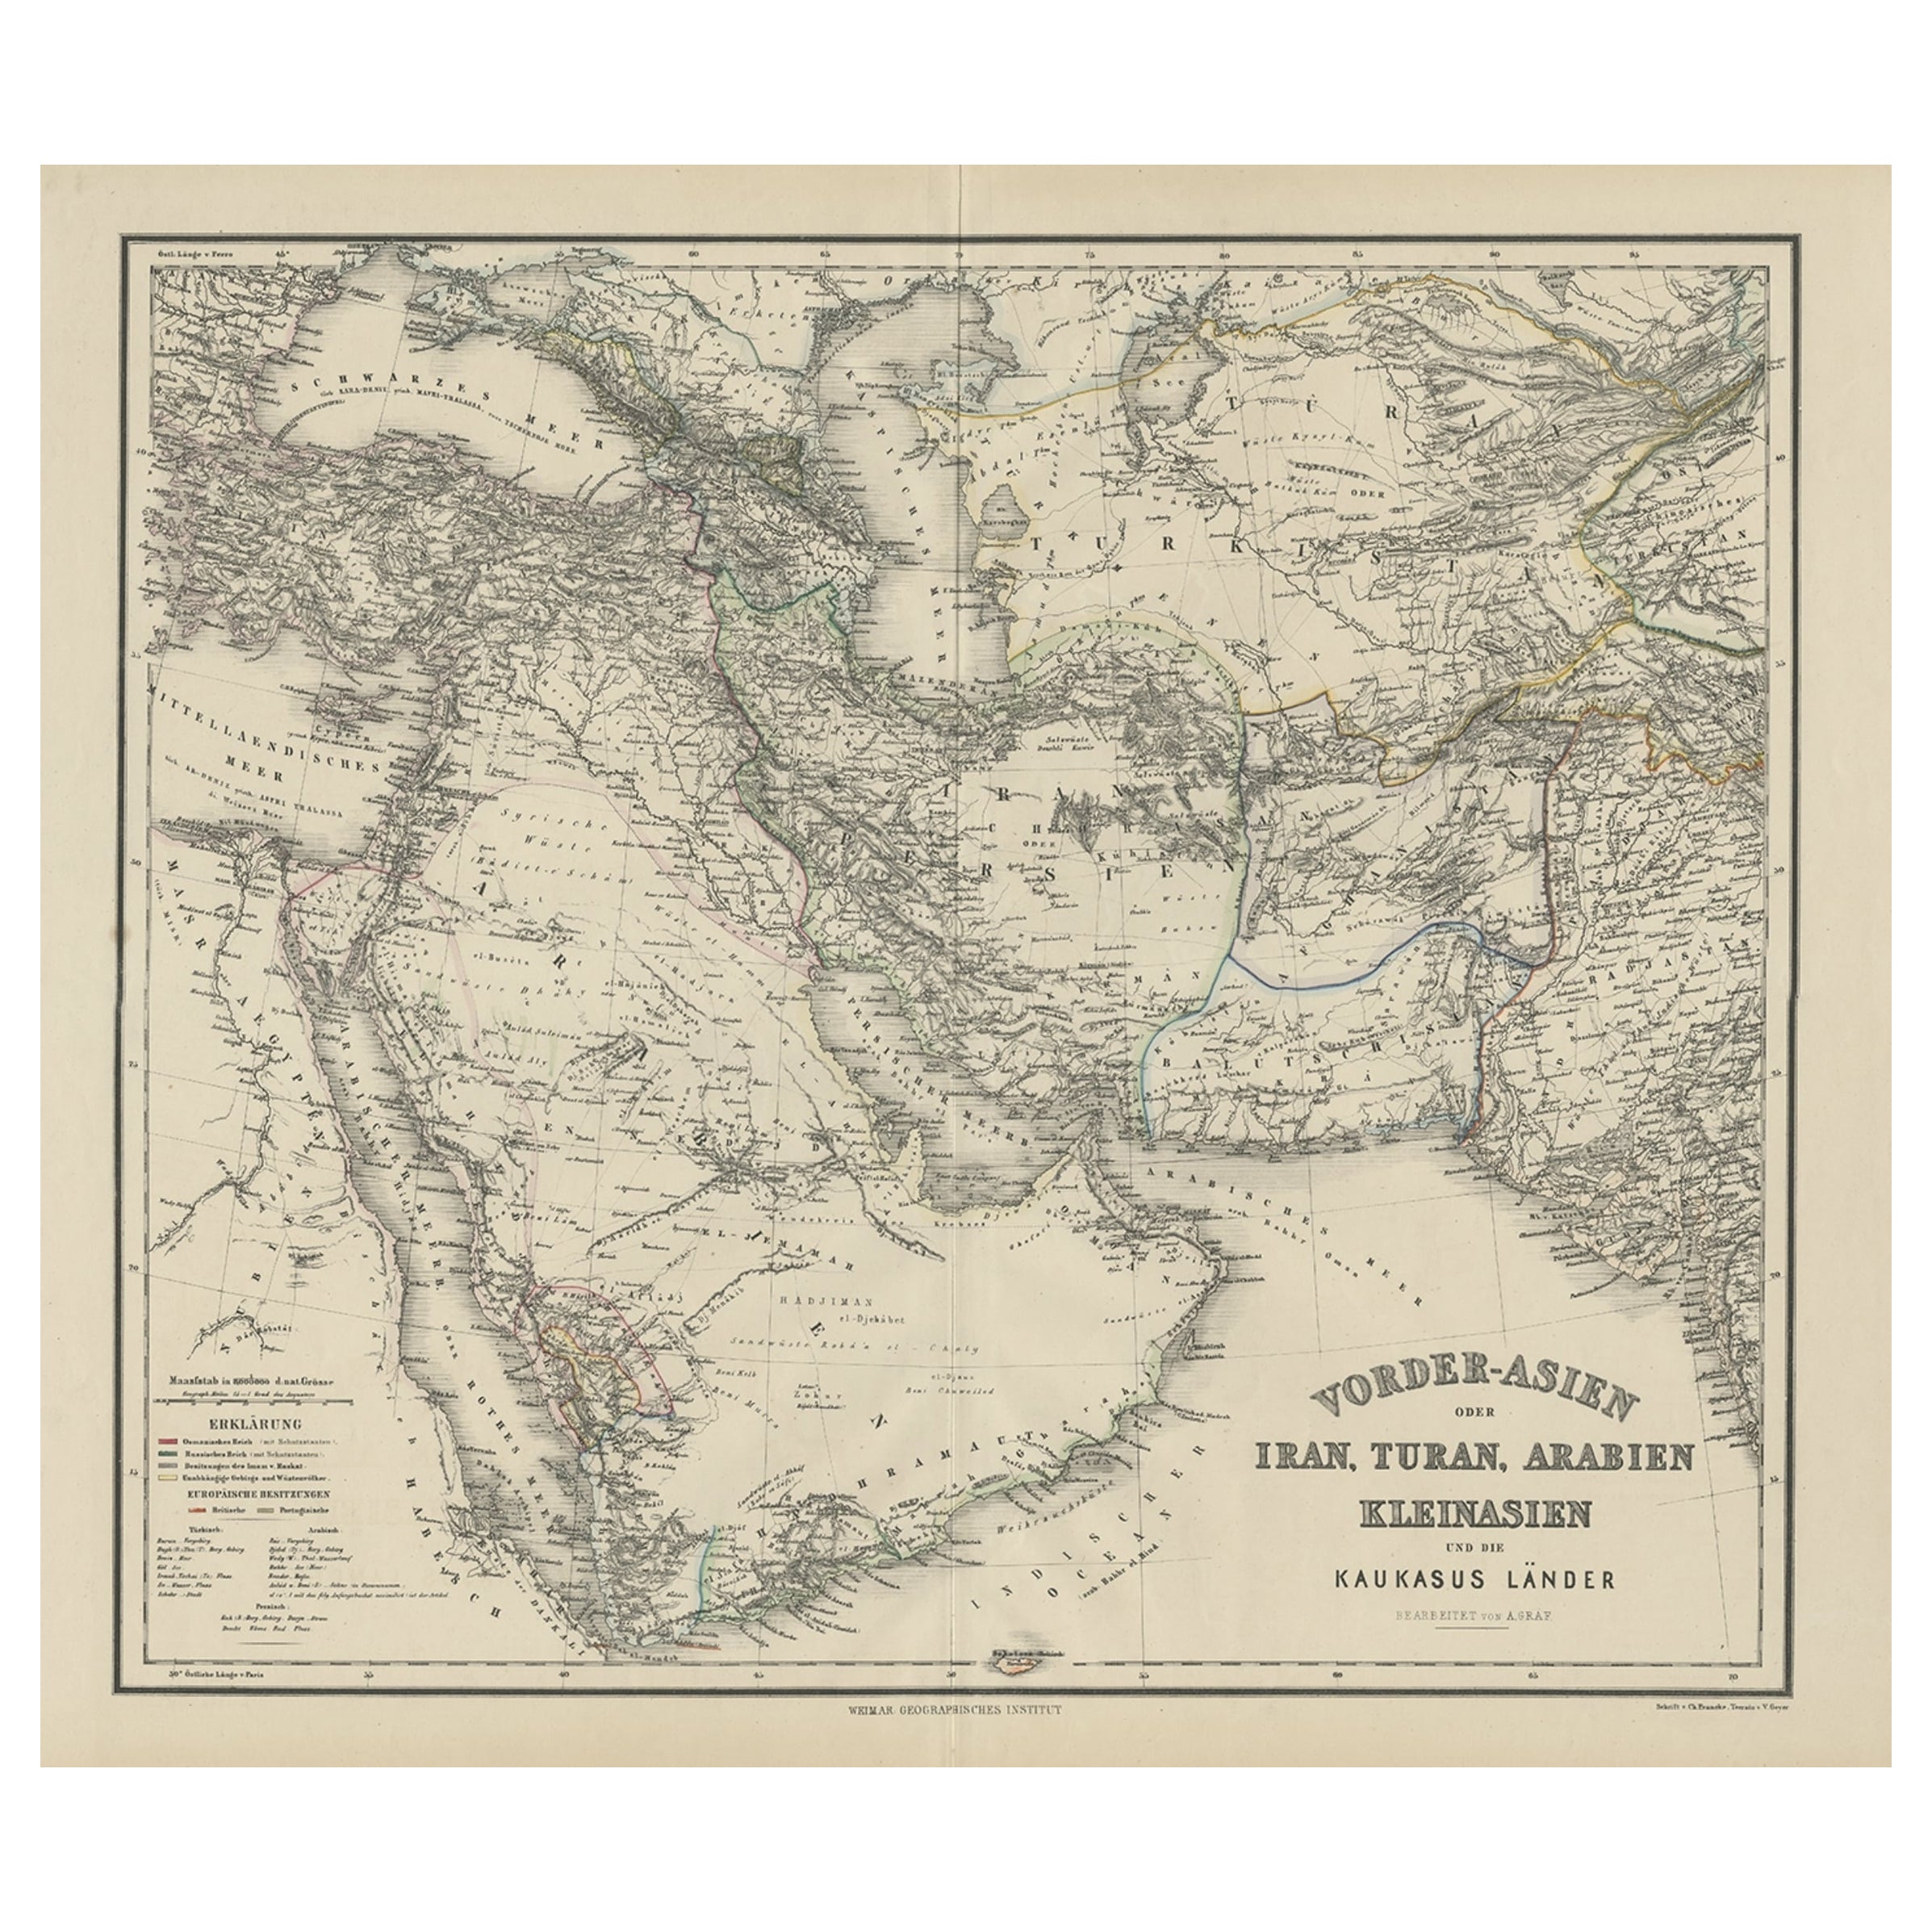 Old German Antique Map of Iran and Arabia, 1866